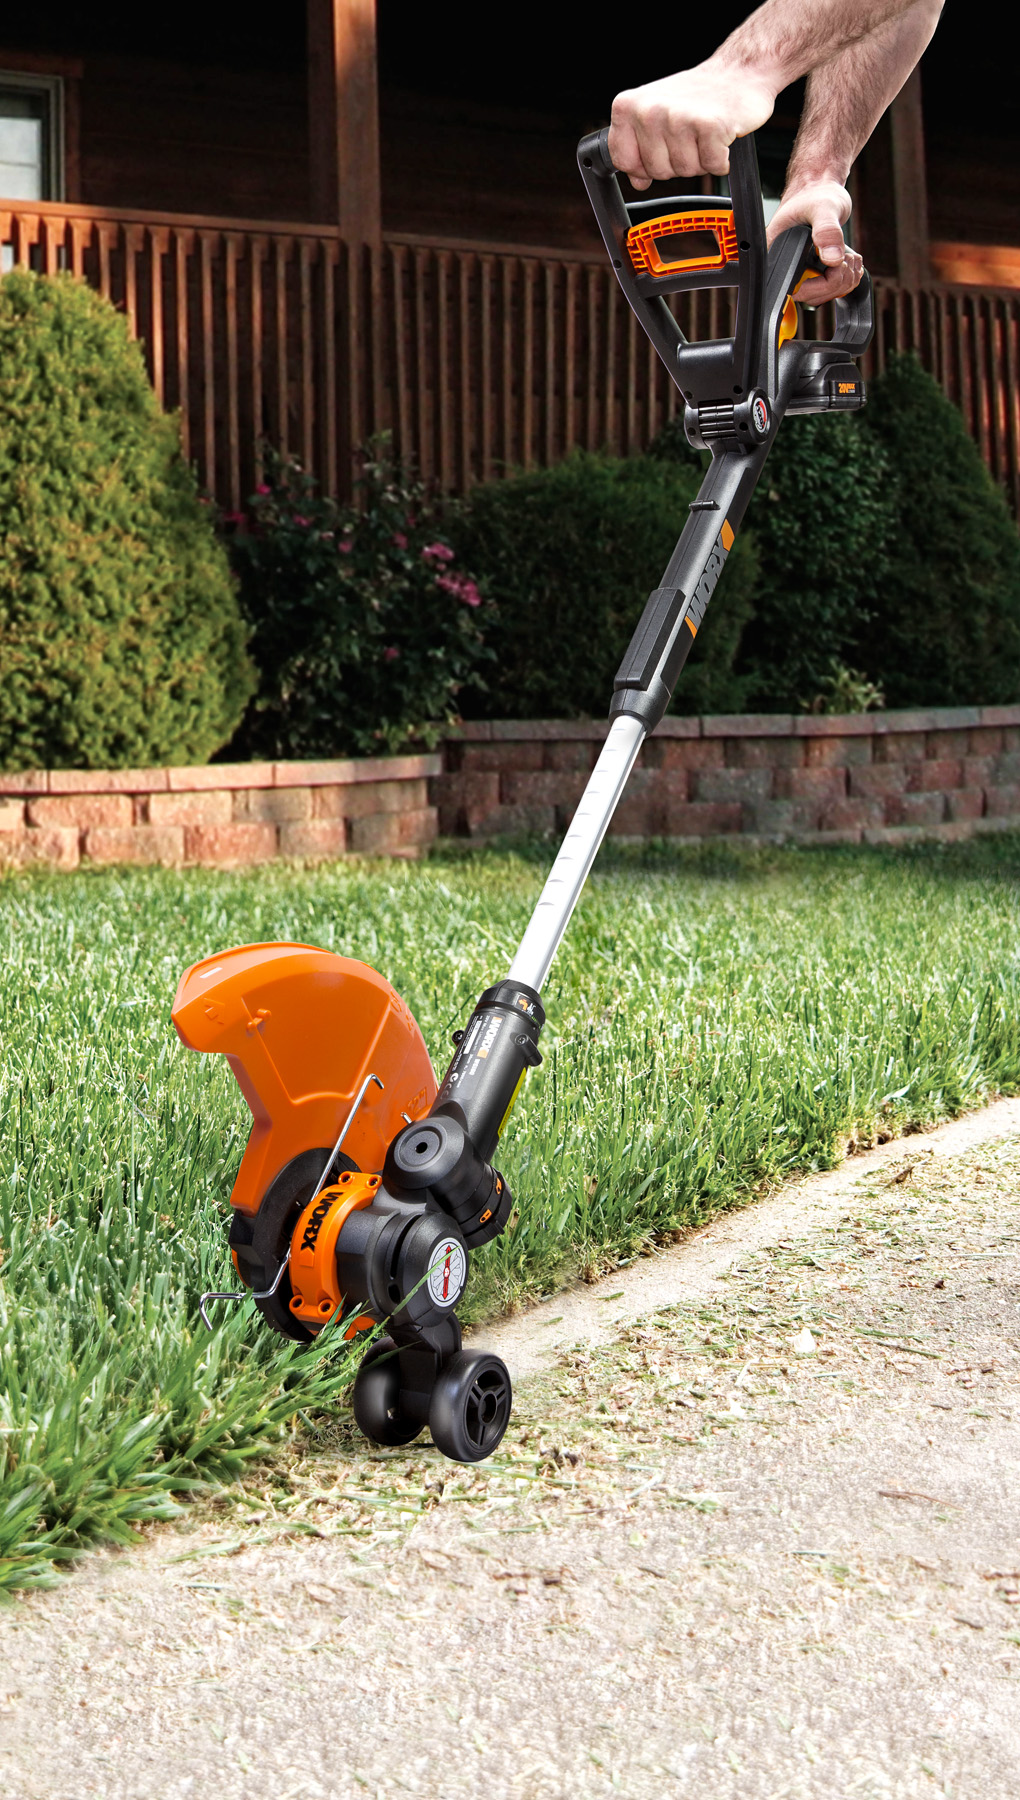 Cut Dad Loose on Father's Day with New WORX Cordless Yard Tools